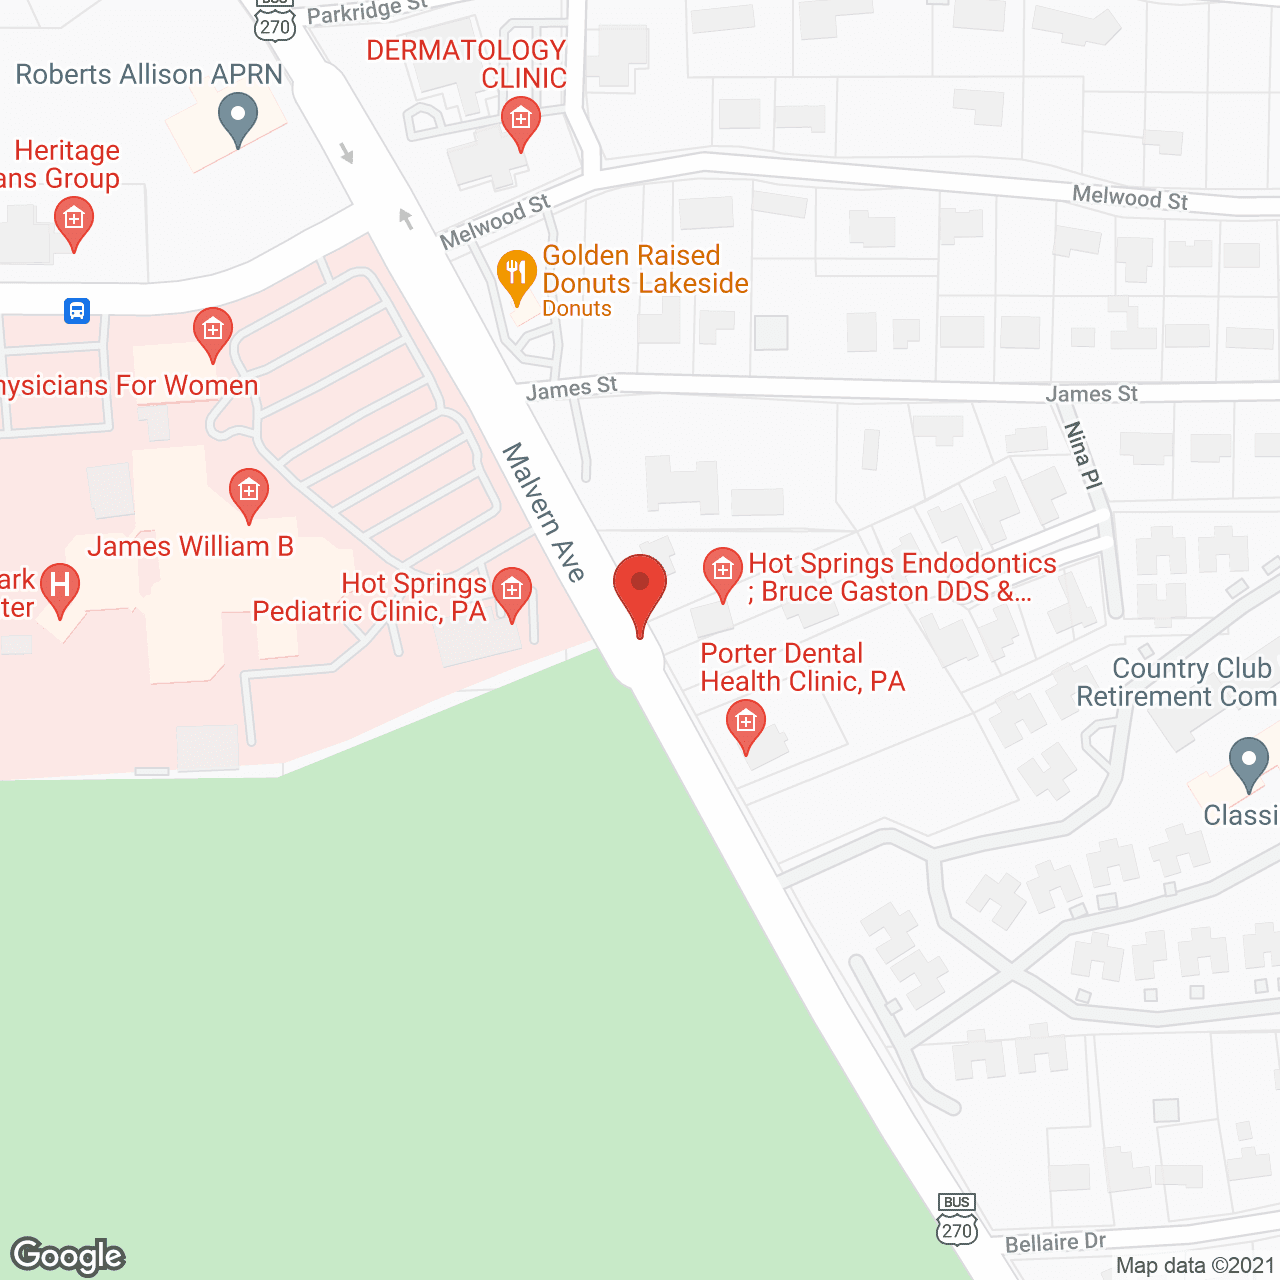 Country Club Village Retirement Community in google map